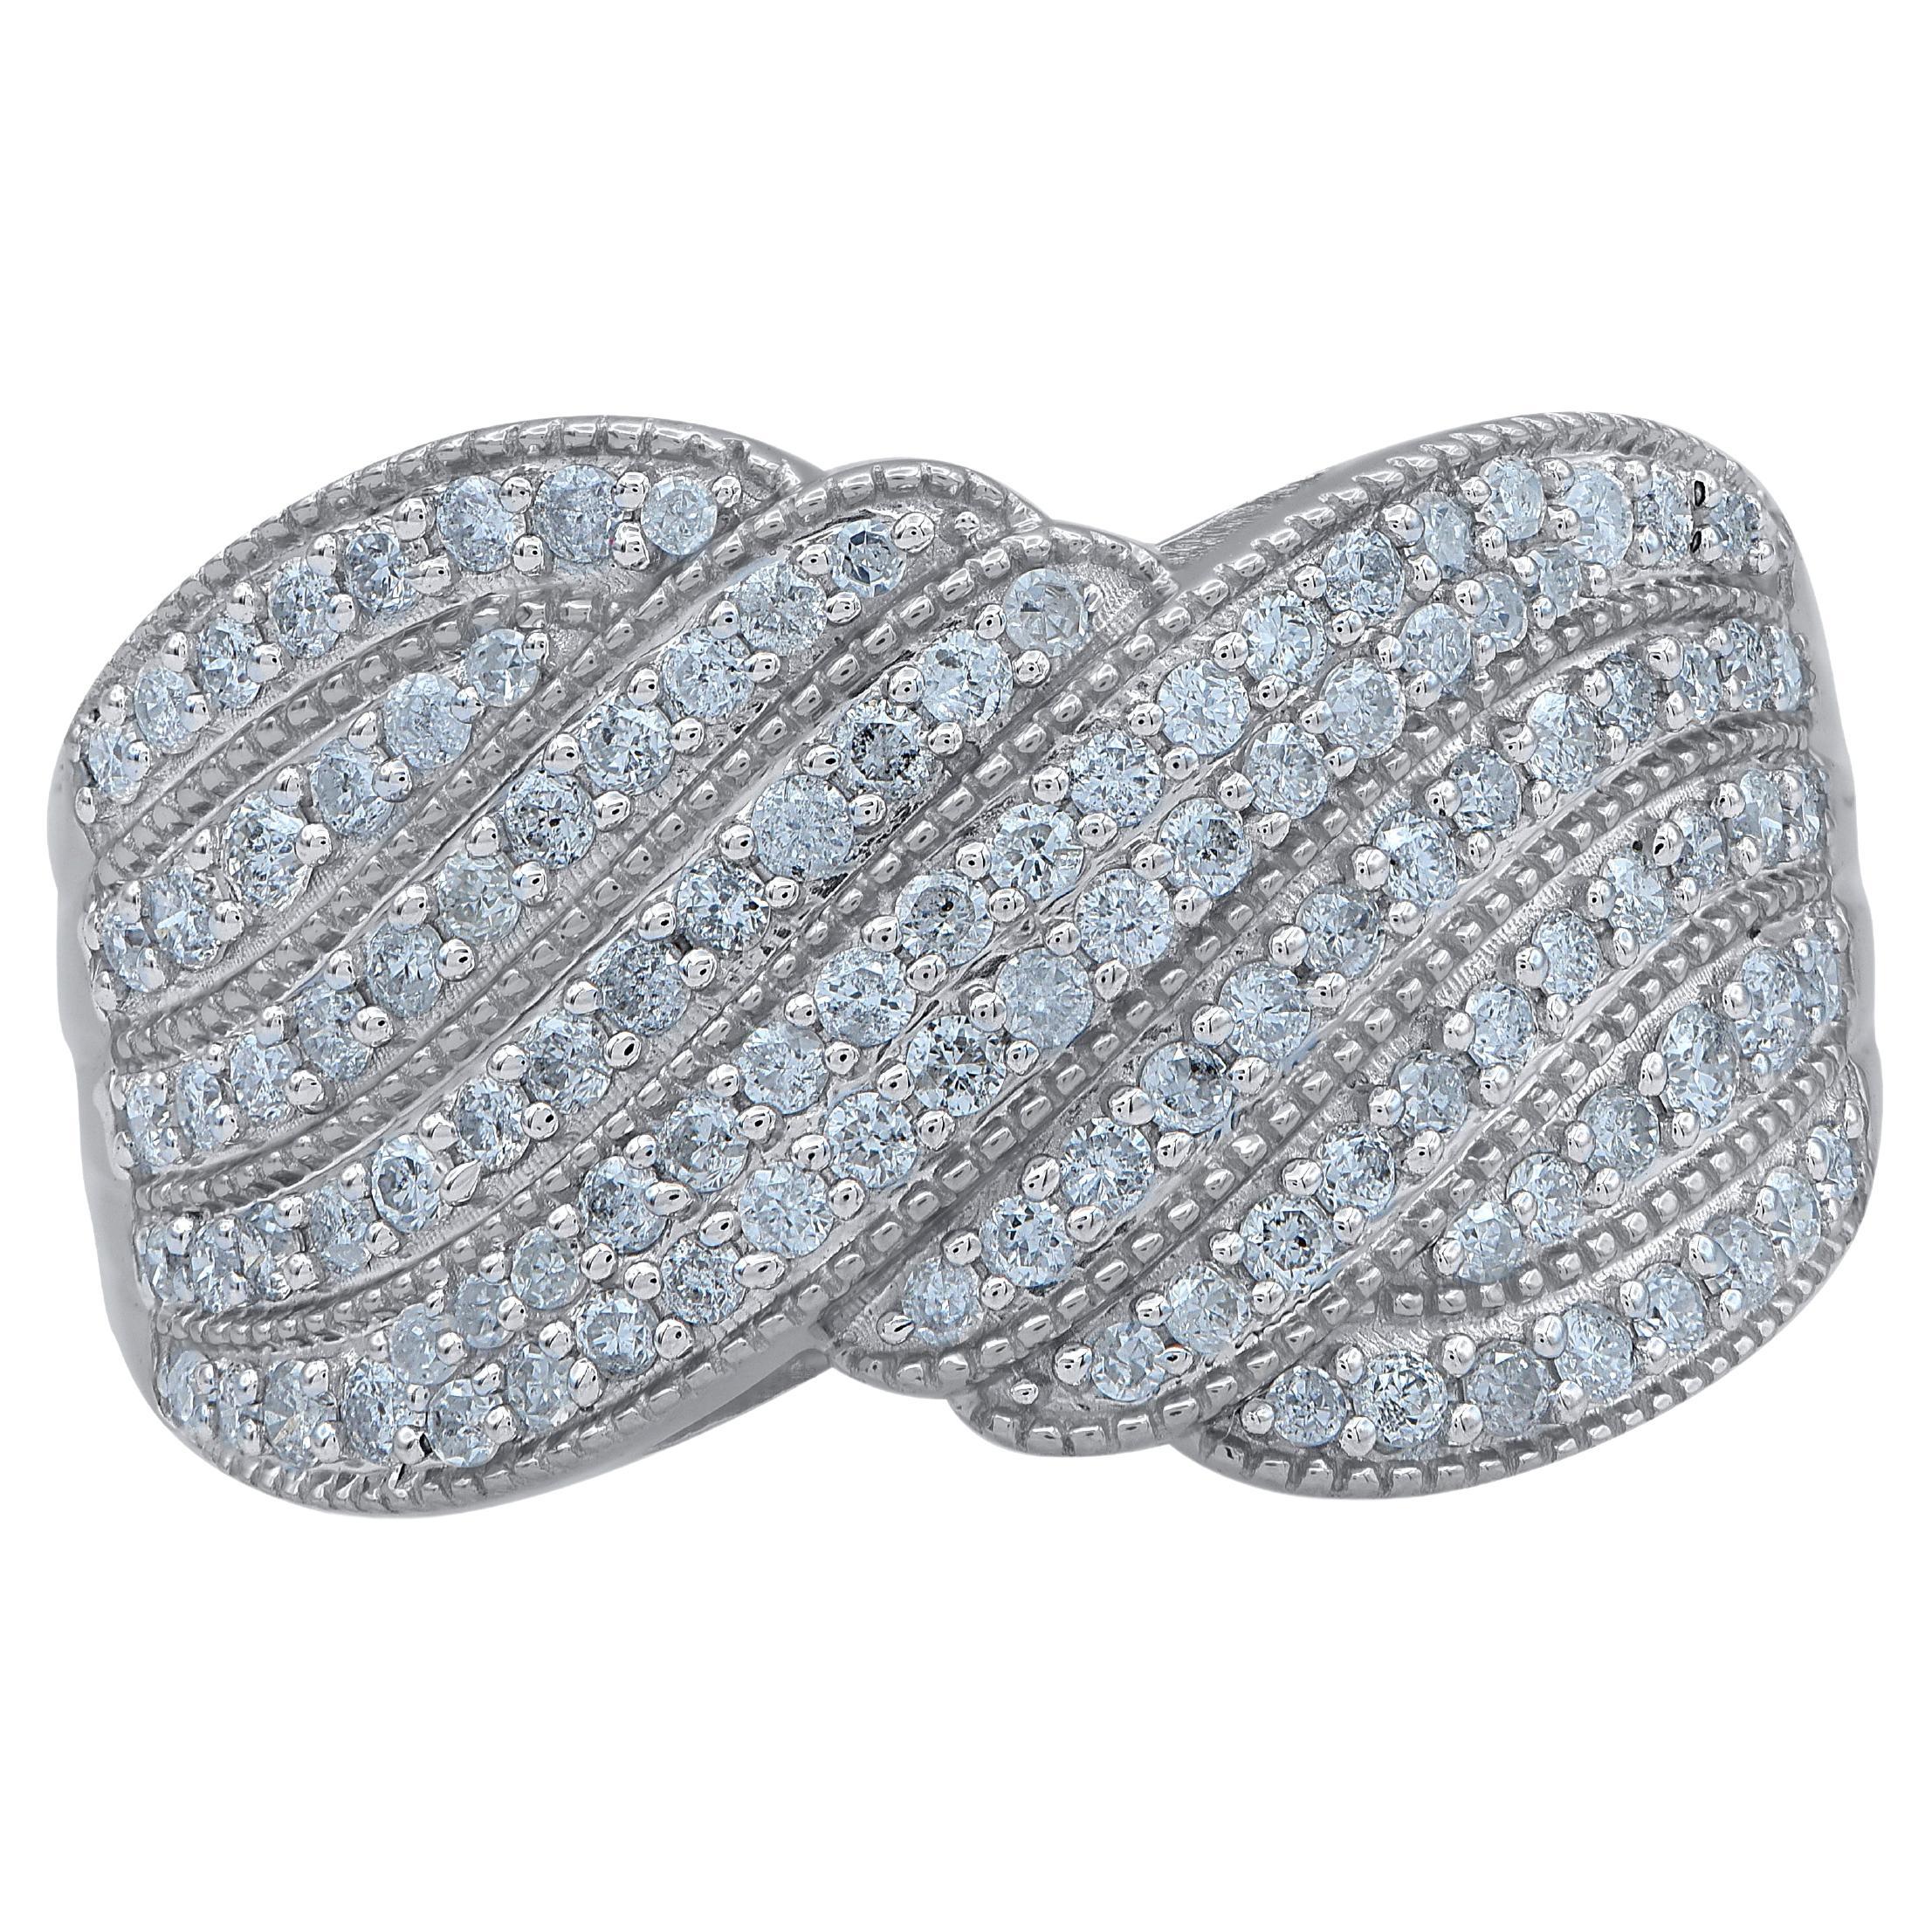 Honor your special day with this exceptional diamond band ring. This band ring features a sparkling 114 brilliant cut & single cut diamonds beautifully set in pave setting. The total diamond weight is 0.75 Carat. The diamonds are graded as H-I color